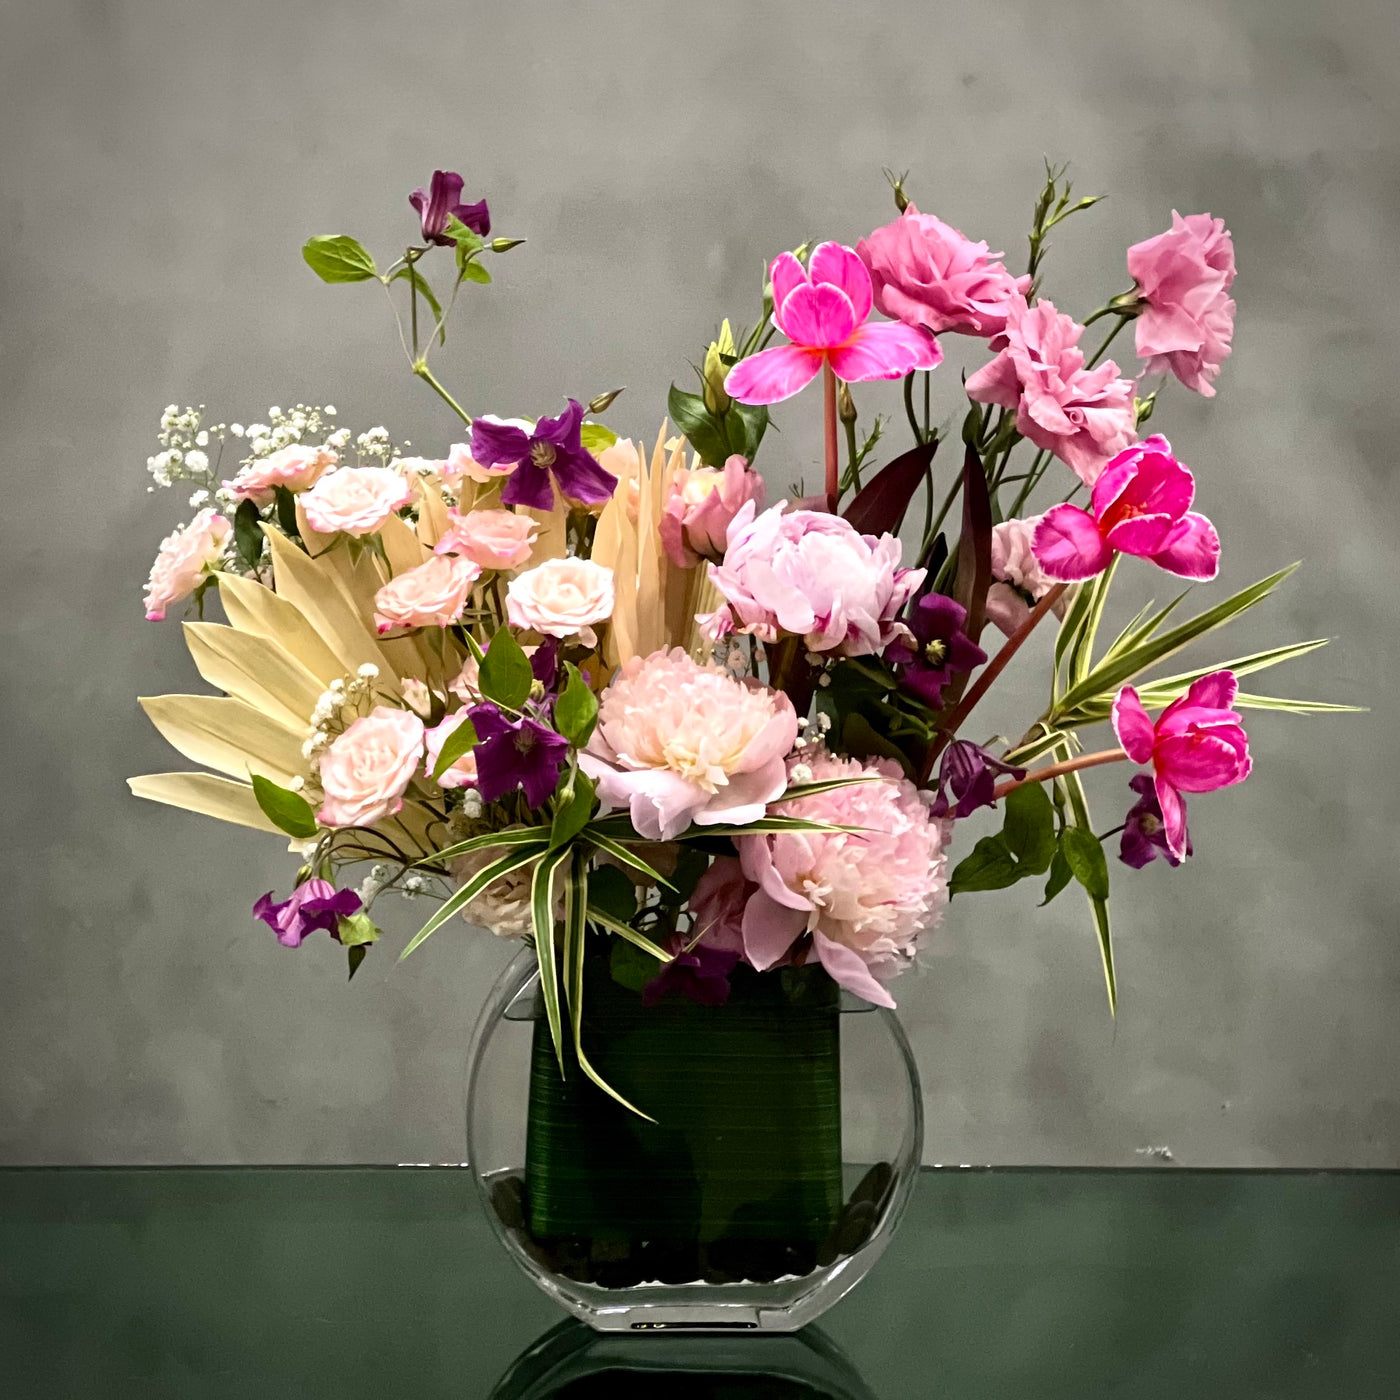 Beverly Hills Florist presents Modern Garden for same day delivery !  Includes Pink Tulips, Pink Peonies, Pink Baby Roses and various blooms. Get well soon flowers, summer flowers, love and romance flowers, welcome home flowers